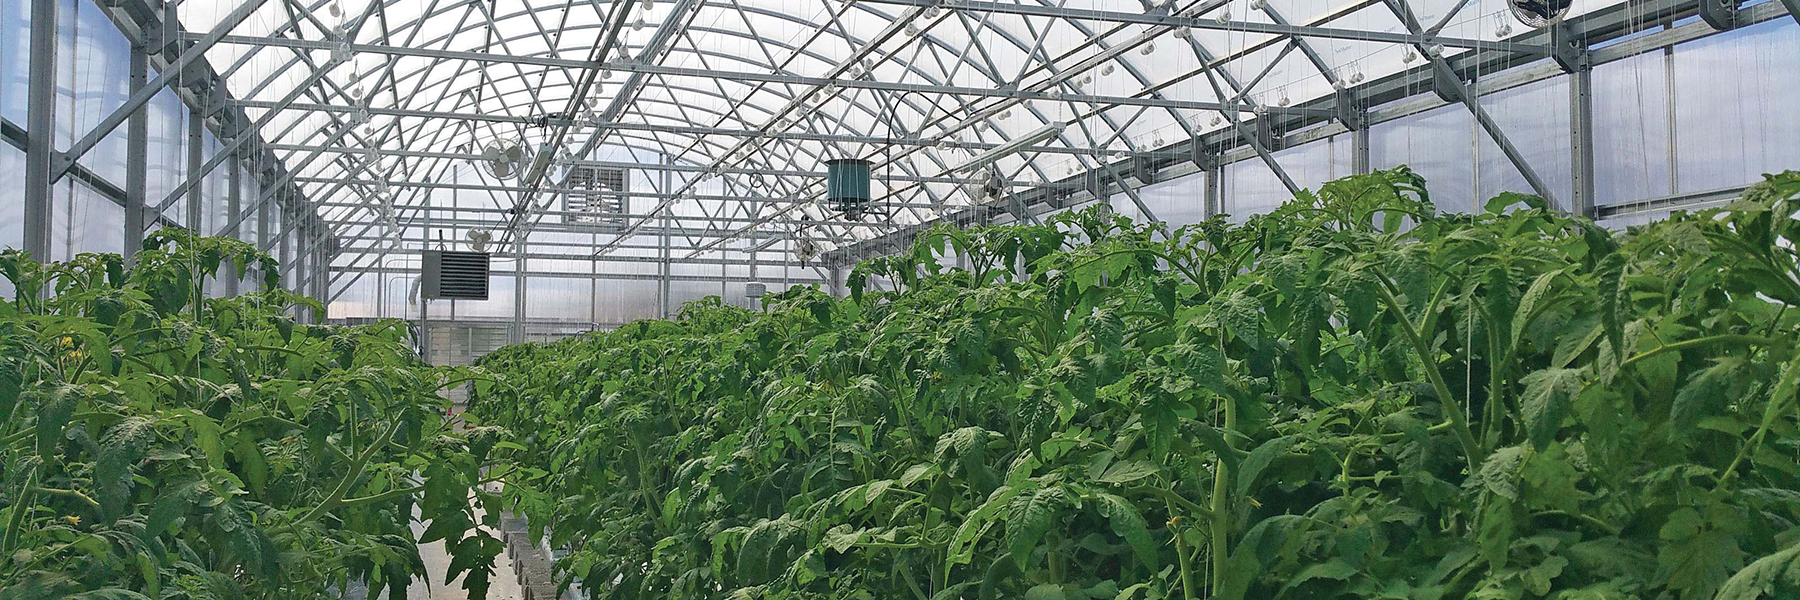 Interiopr greenhouse with many tall plants